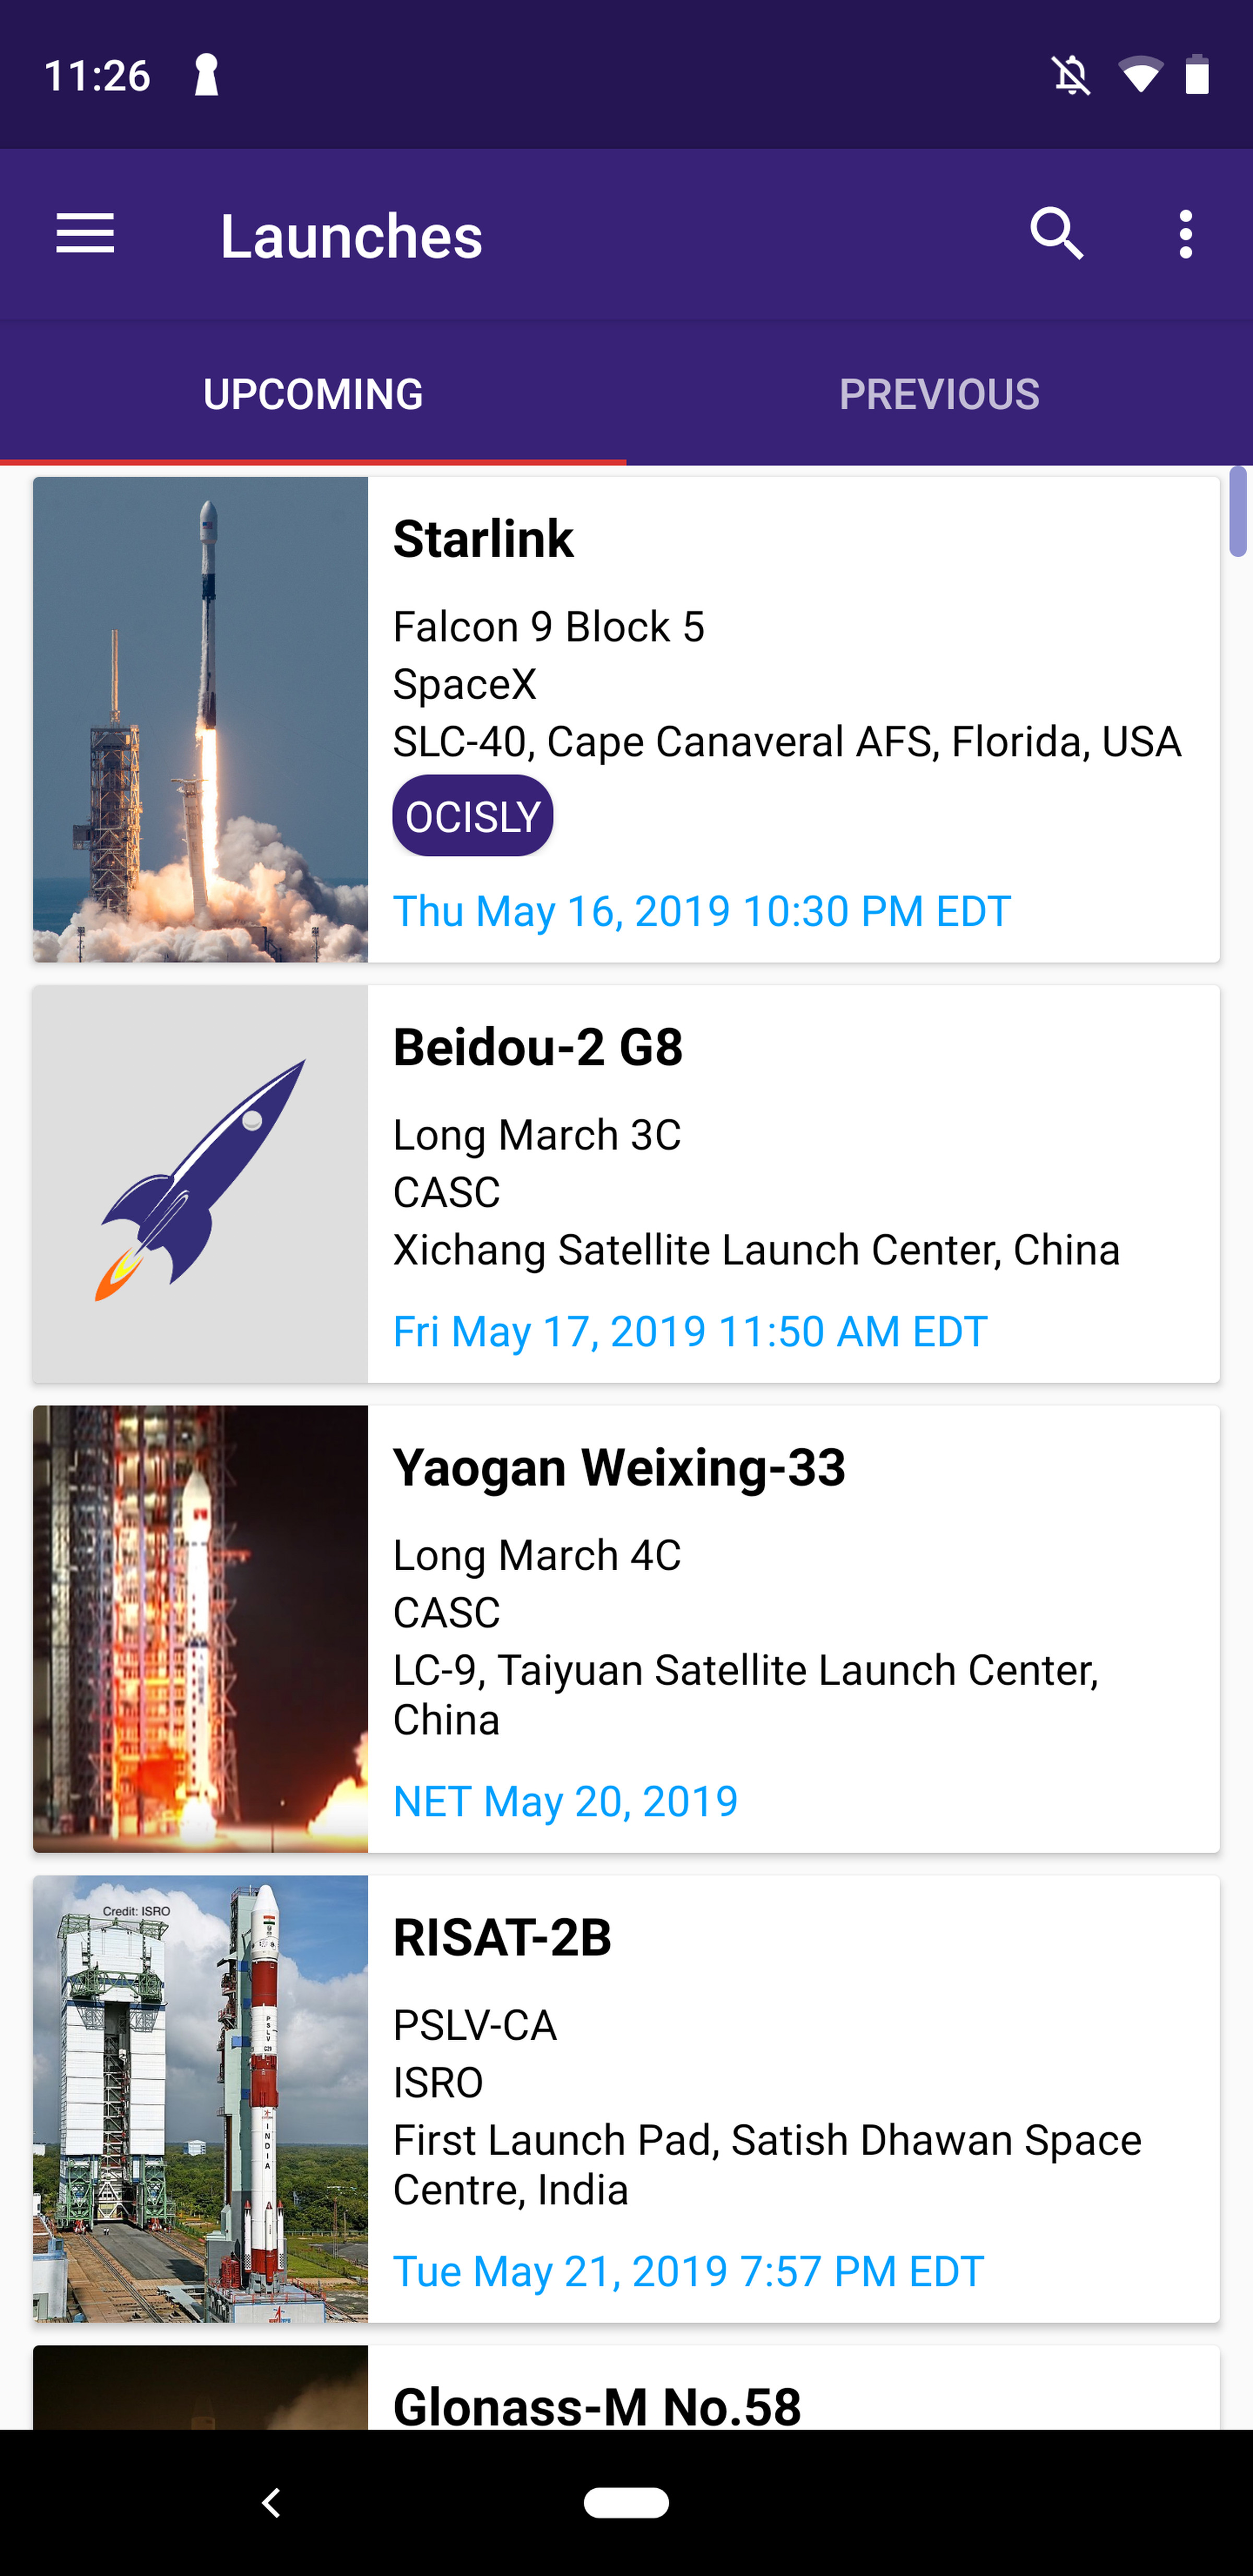 Next spaceflight launches